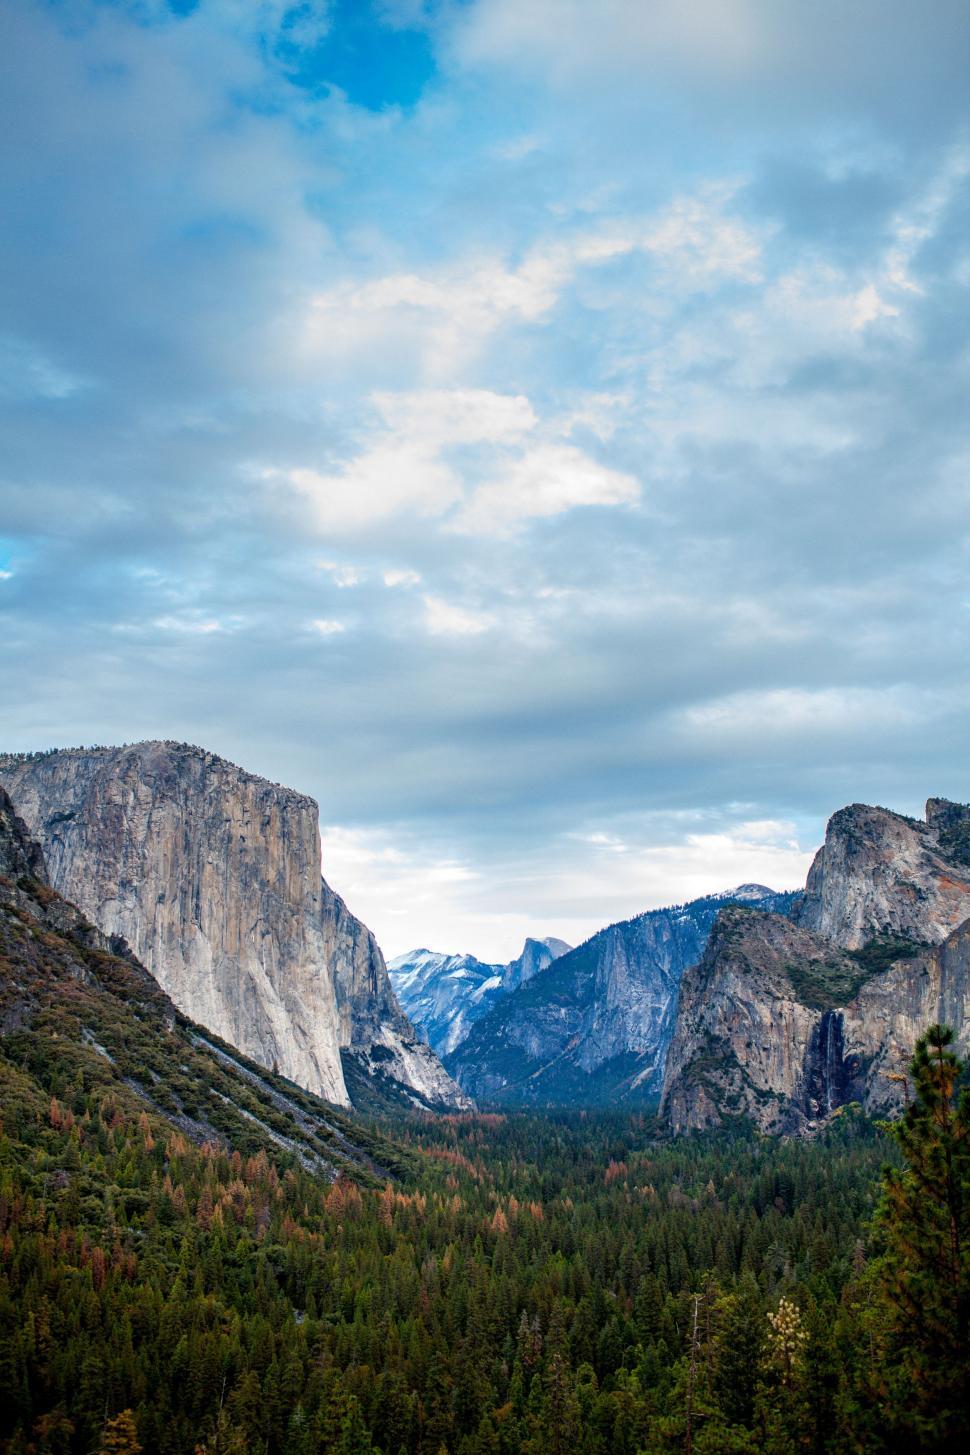 Free Image of Trees and Rock Mountains  